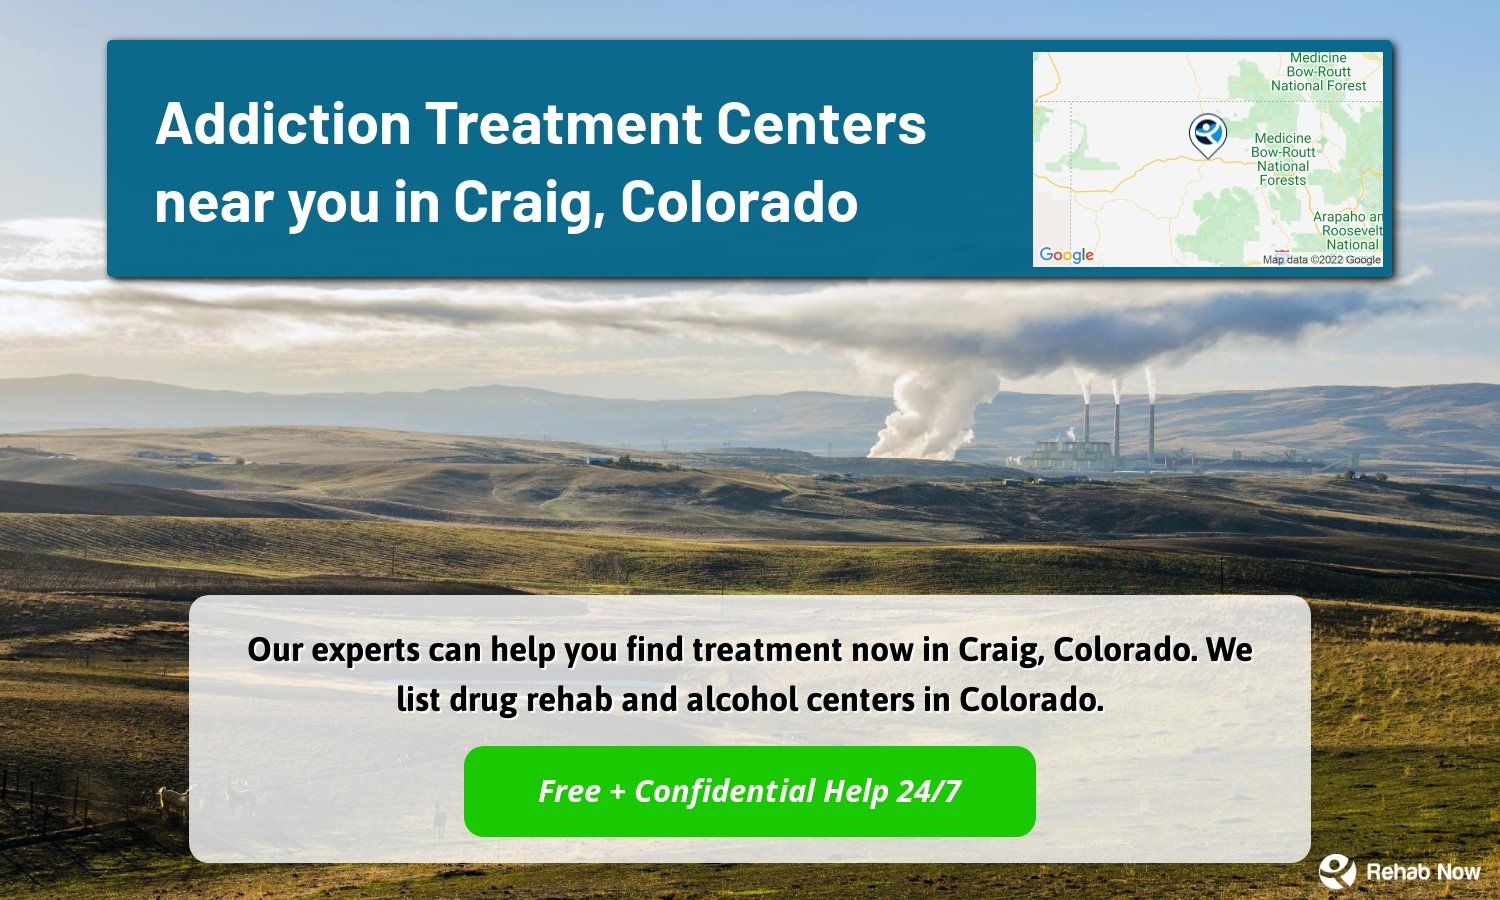 Our experts can help you find treatment now in Craig, Colorado. We list drug rehab and alcohol centers in Colorado.